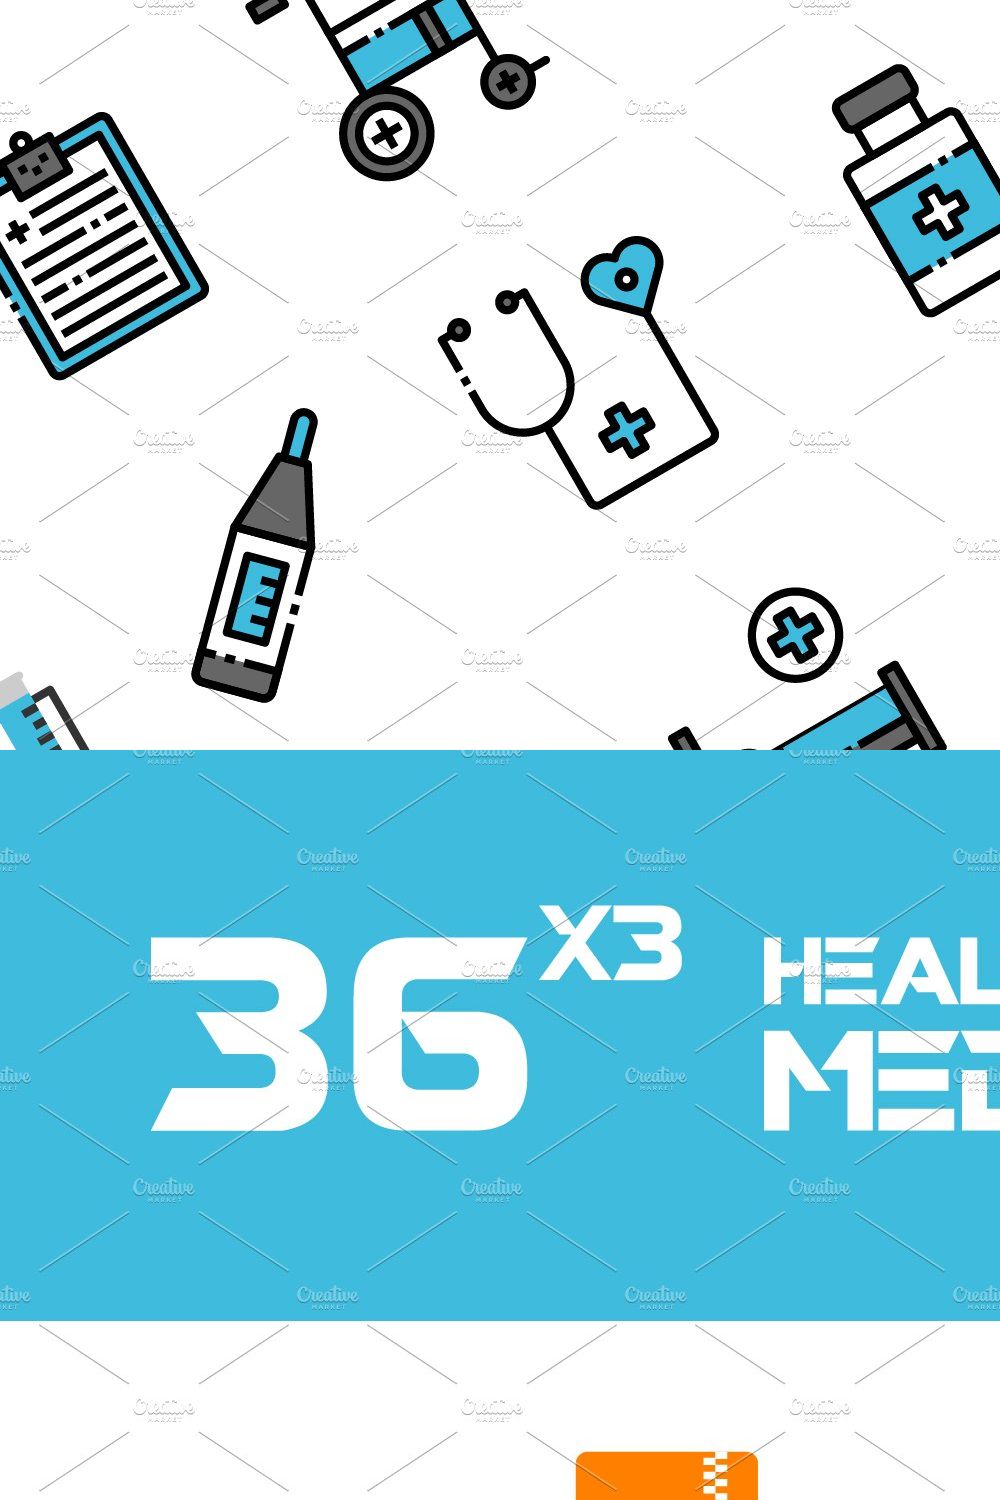 36x3 Healthcare & Medical icons pinterest preview image.